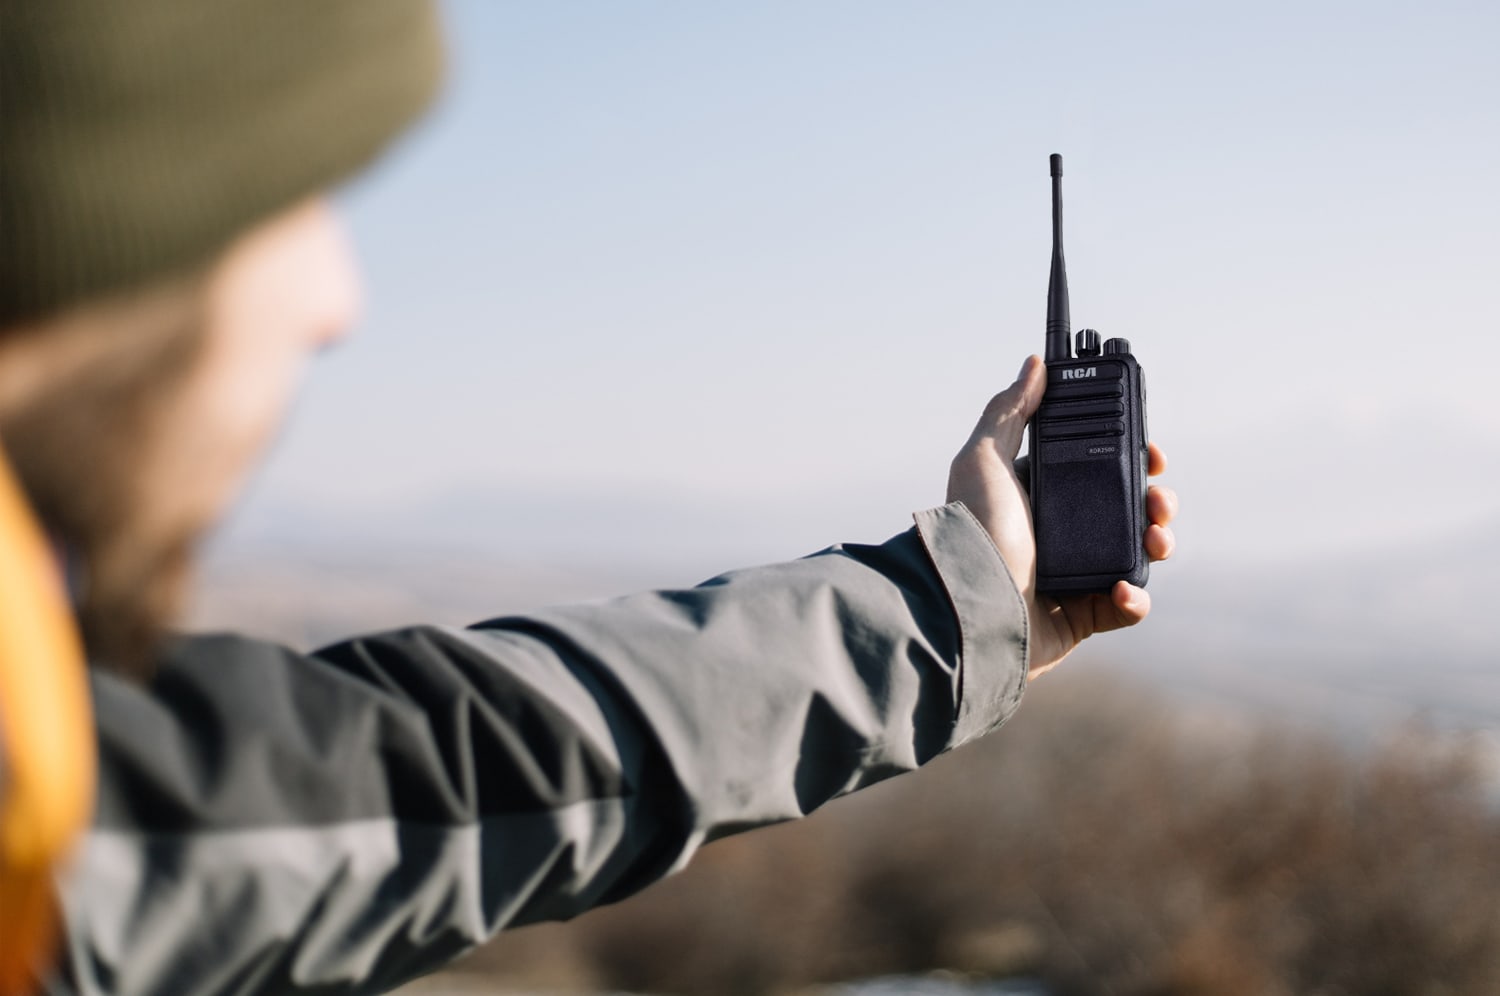 A field technician holds an RCA radio away from him to test coverage while outdoors.